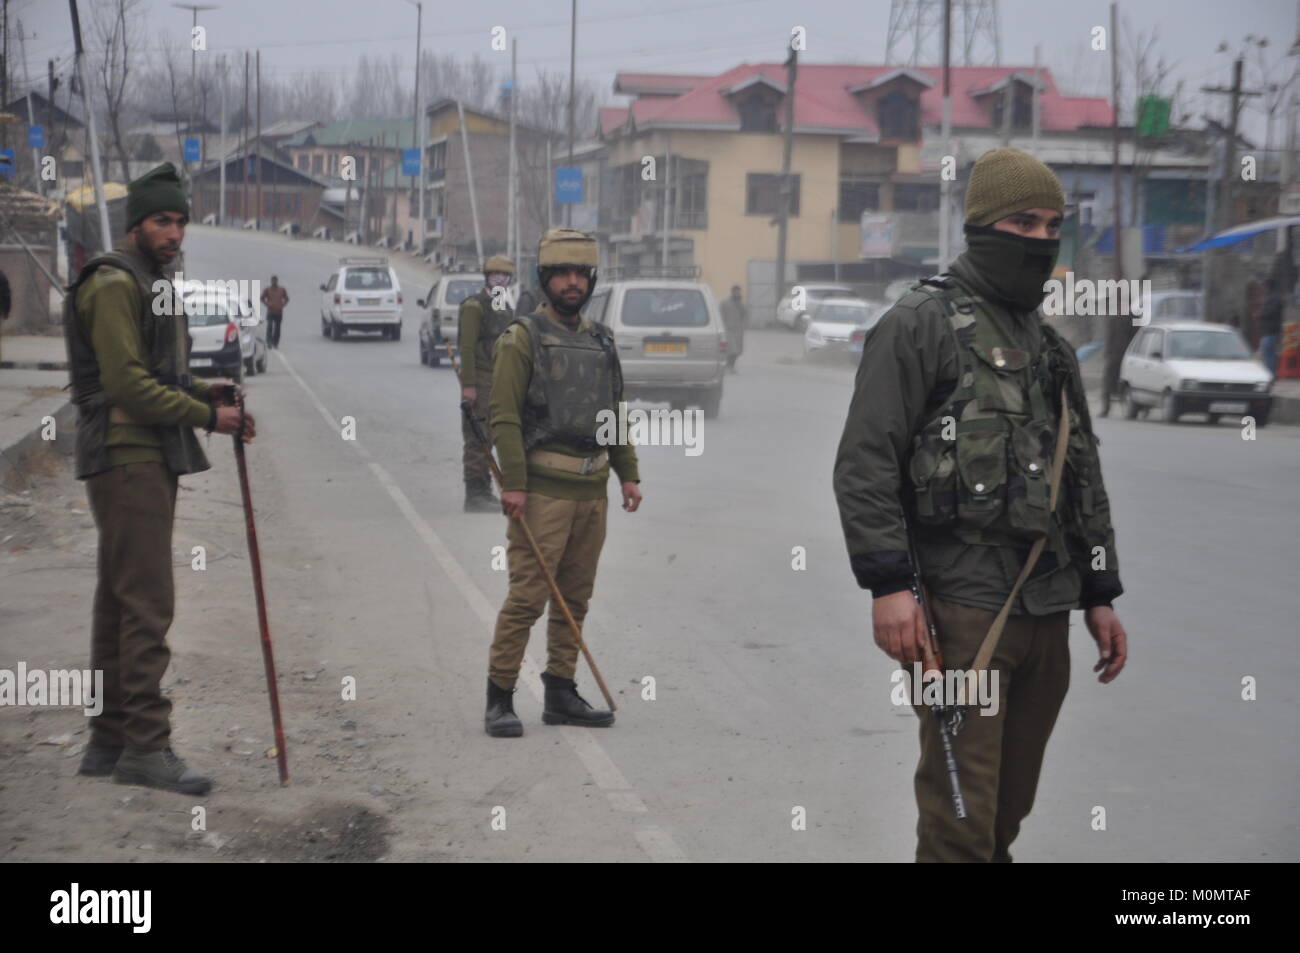 Policemen stand guard in Anantnag, Kashmir on January 23, 2018, ahead of Indian Republic Day on January 26. Stock Photo